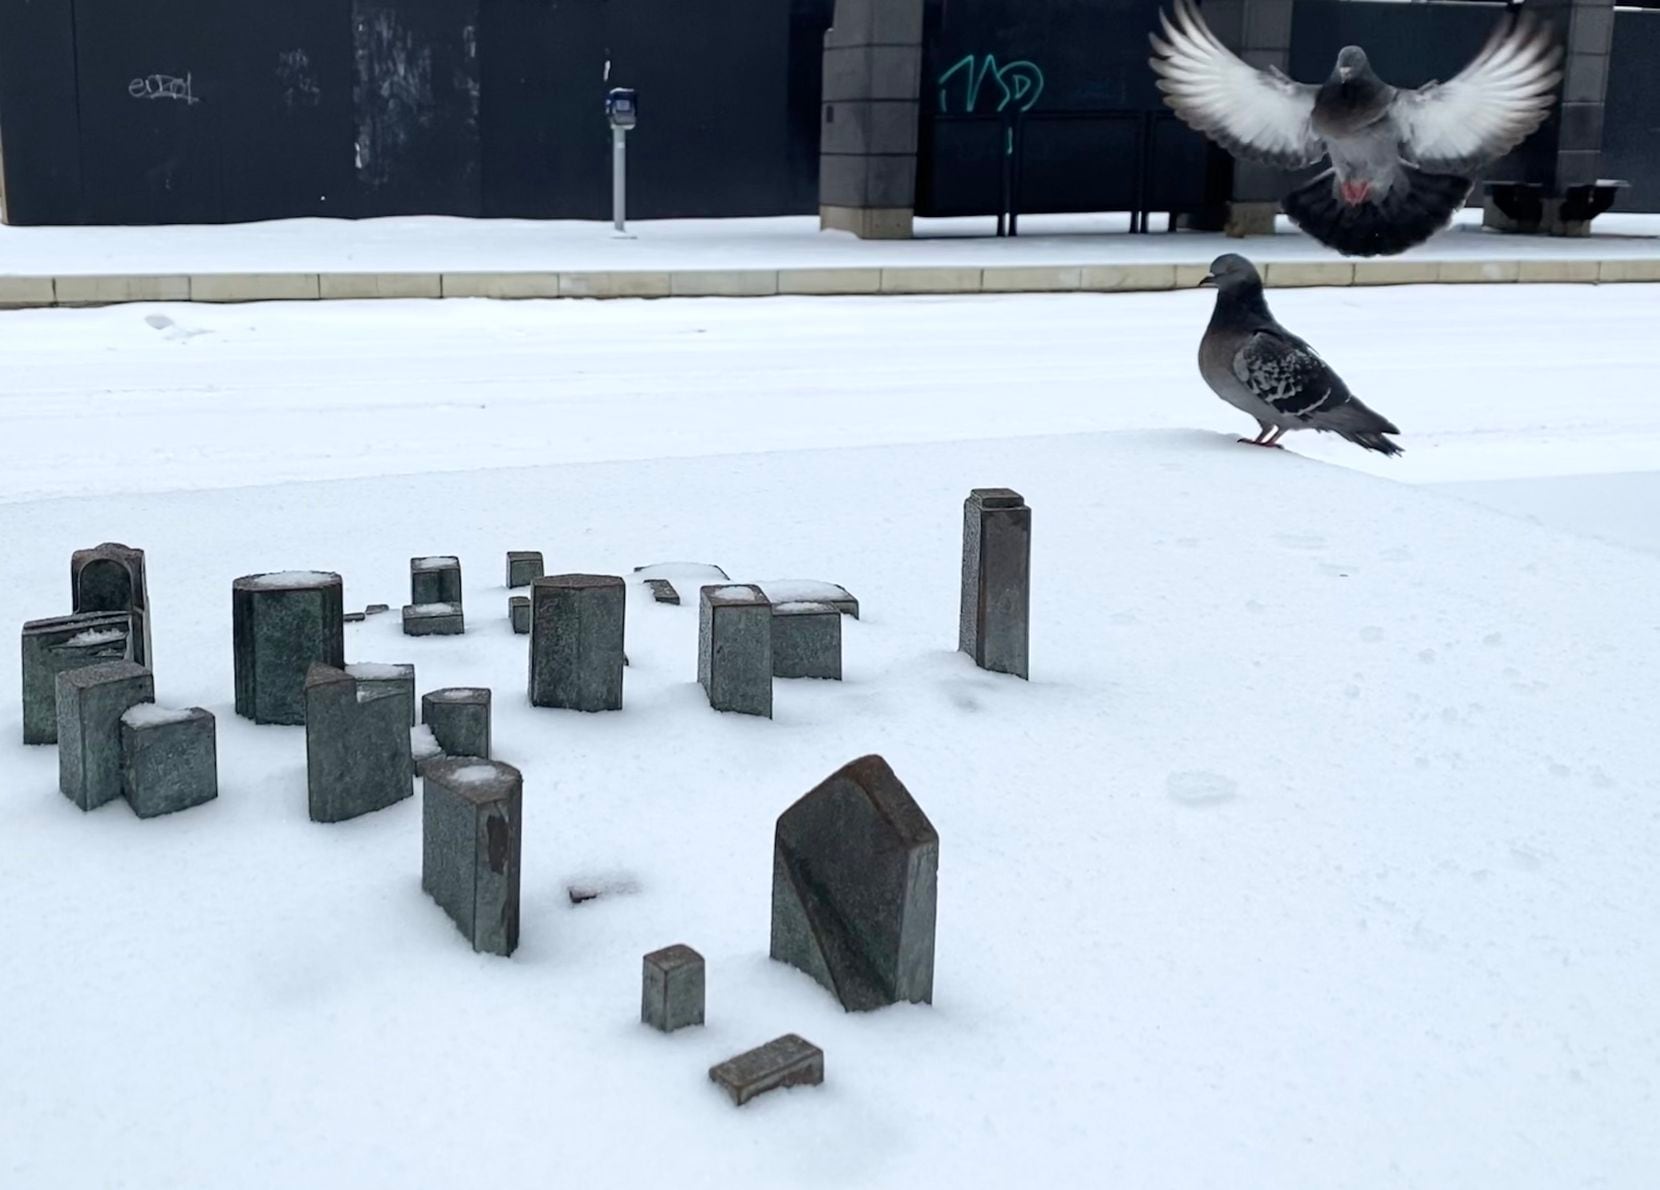 Two pigeons land, in the snow, on a miniature model of the City of Dallas at the...